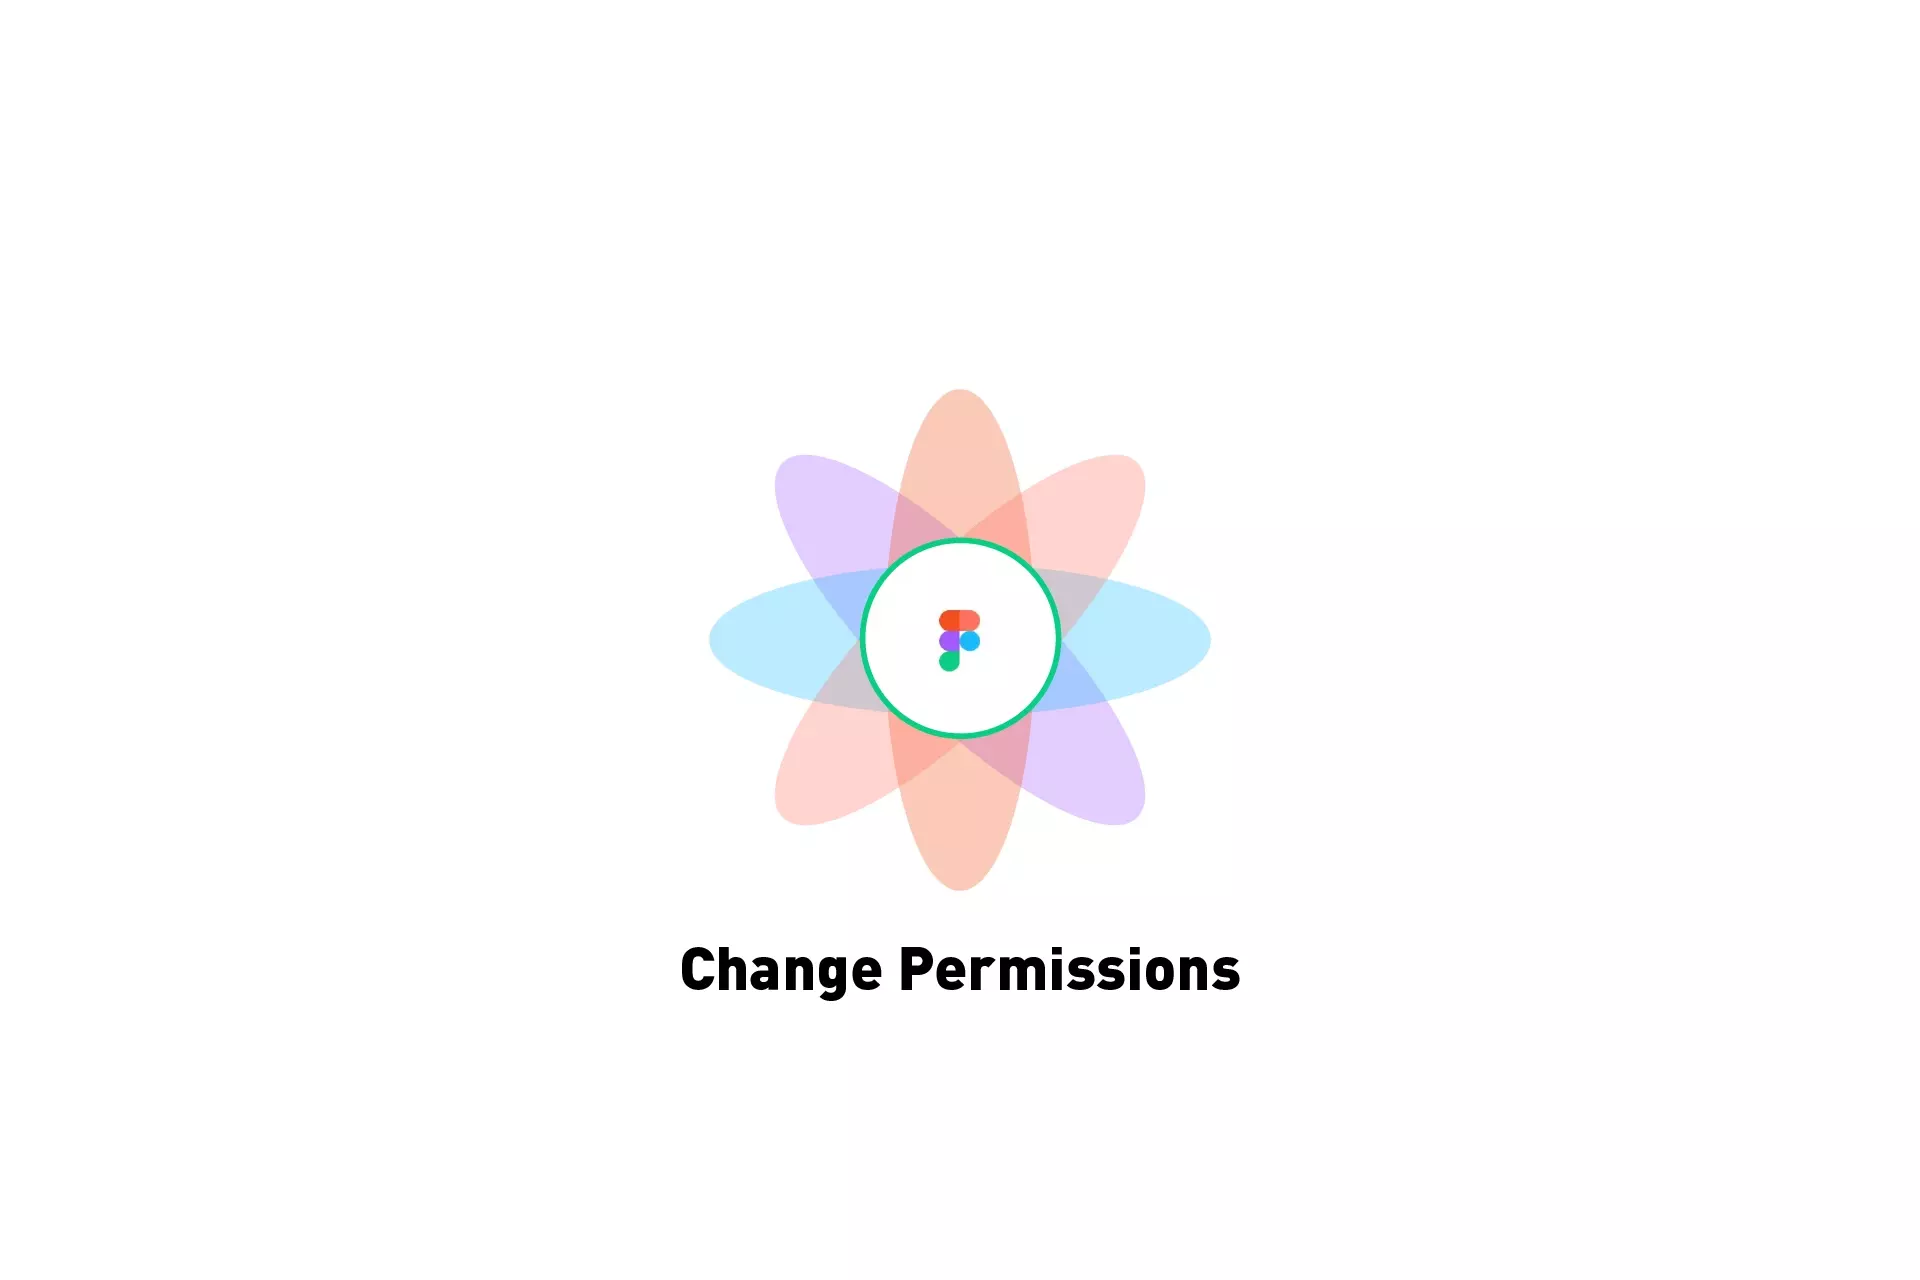 A flower that represents Figma with the text "Change Permissions" beneath it.